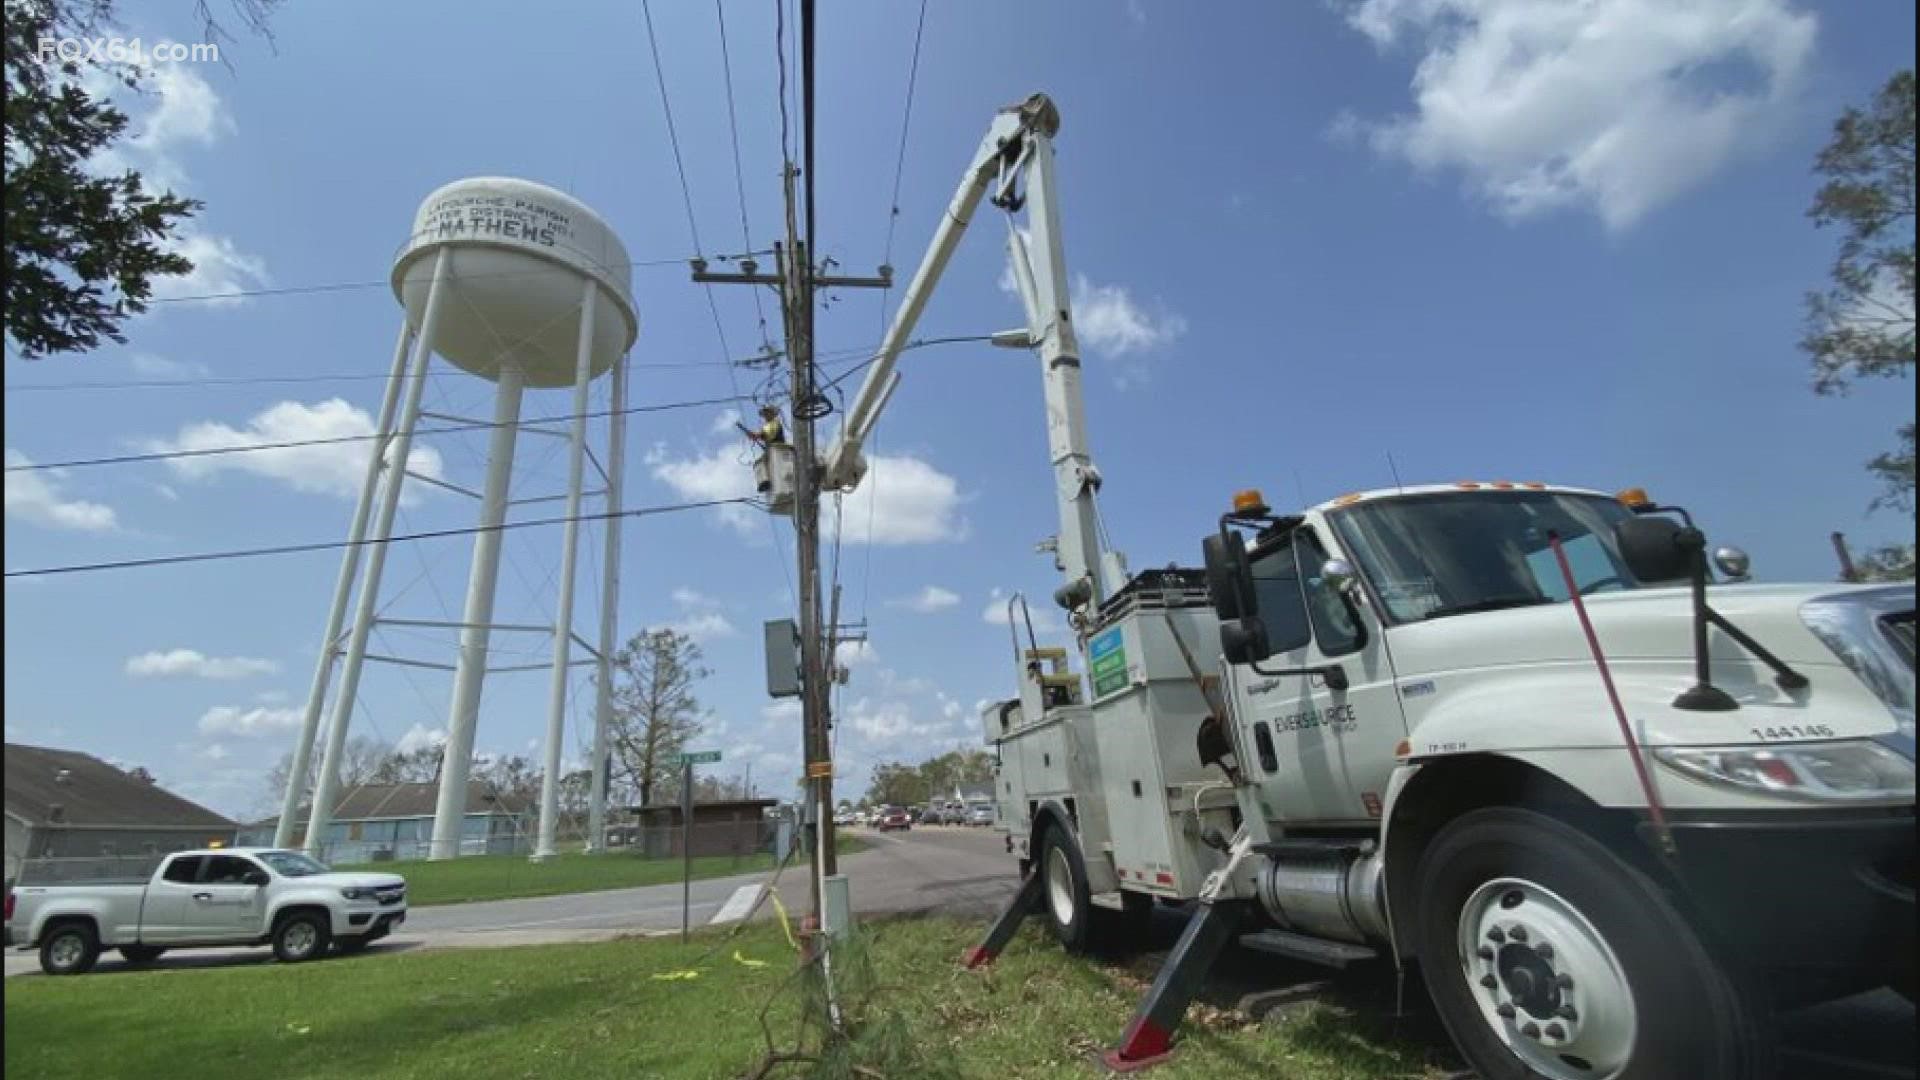 After being in Louisiana for more than two weeks to help with the Hurricane Ida aftermath, those linemen took the time to share their experiences.